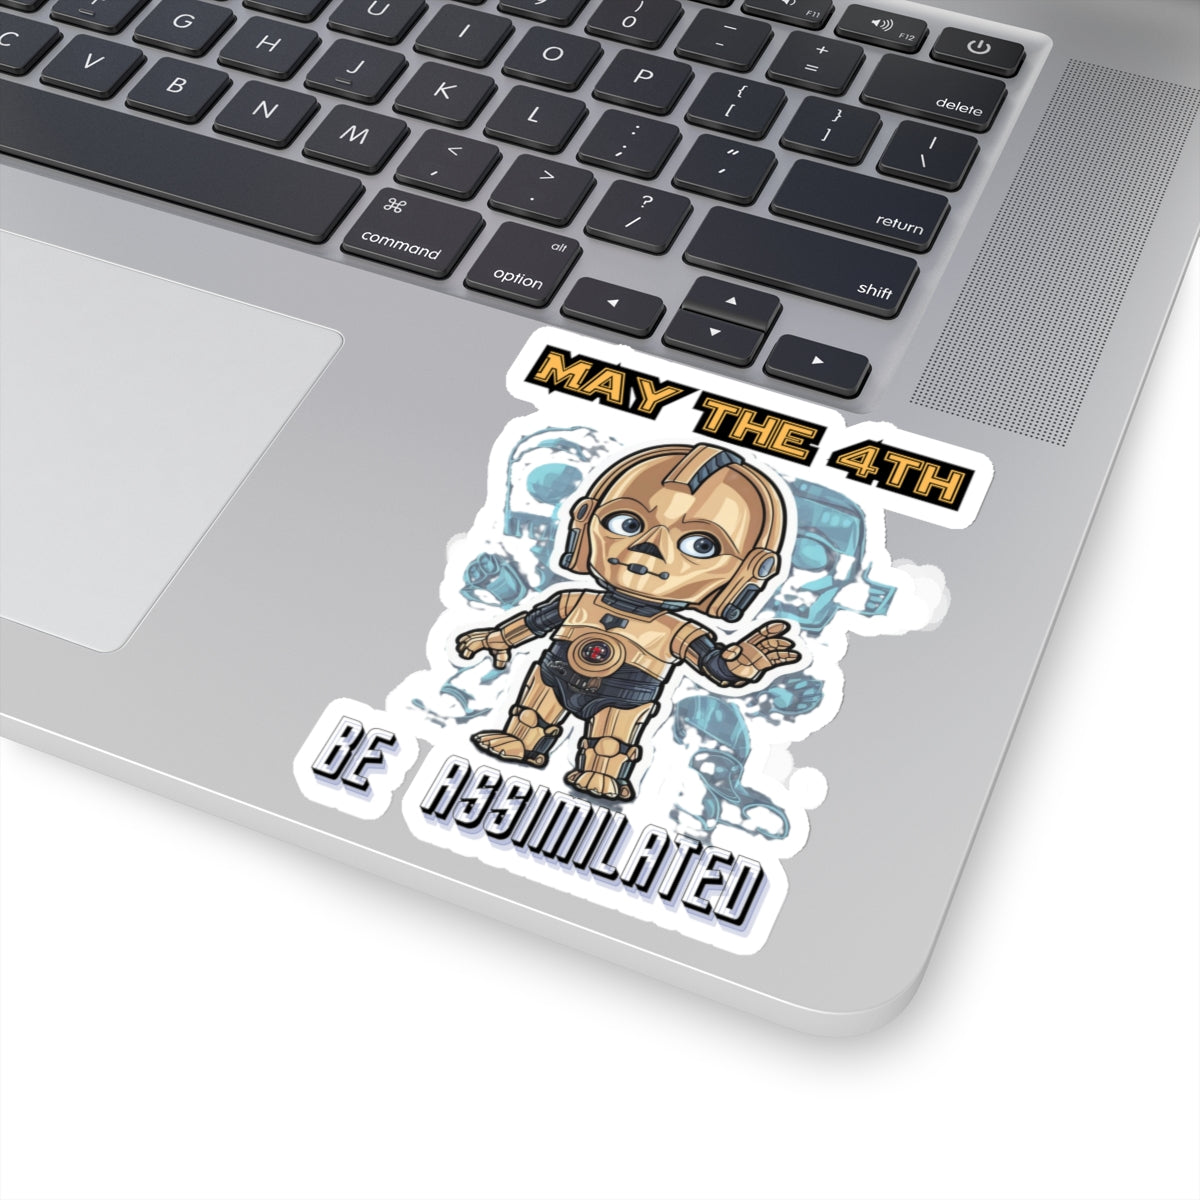 Be Assimilated Kiss-Cut Sticker